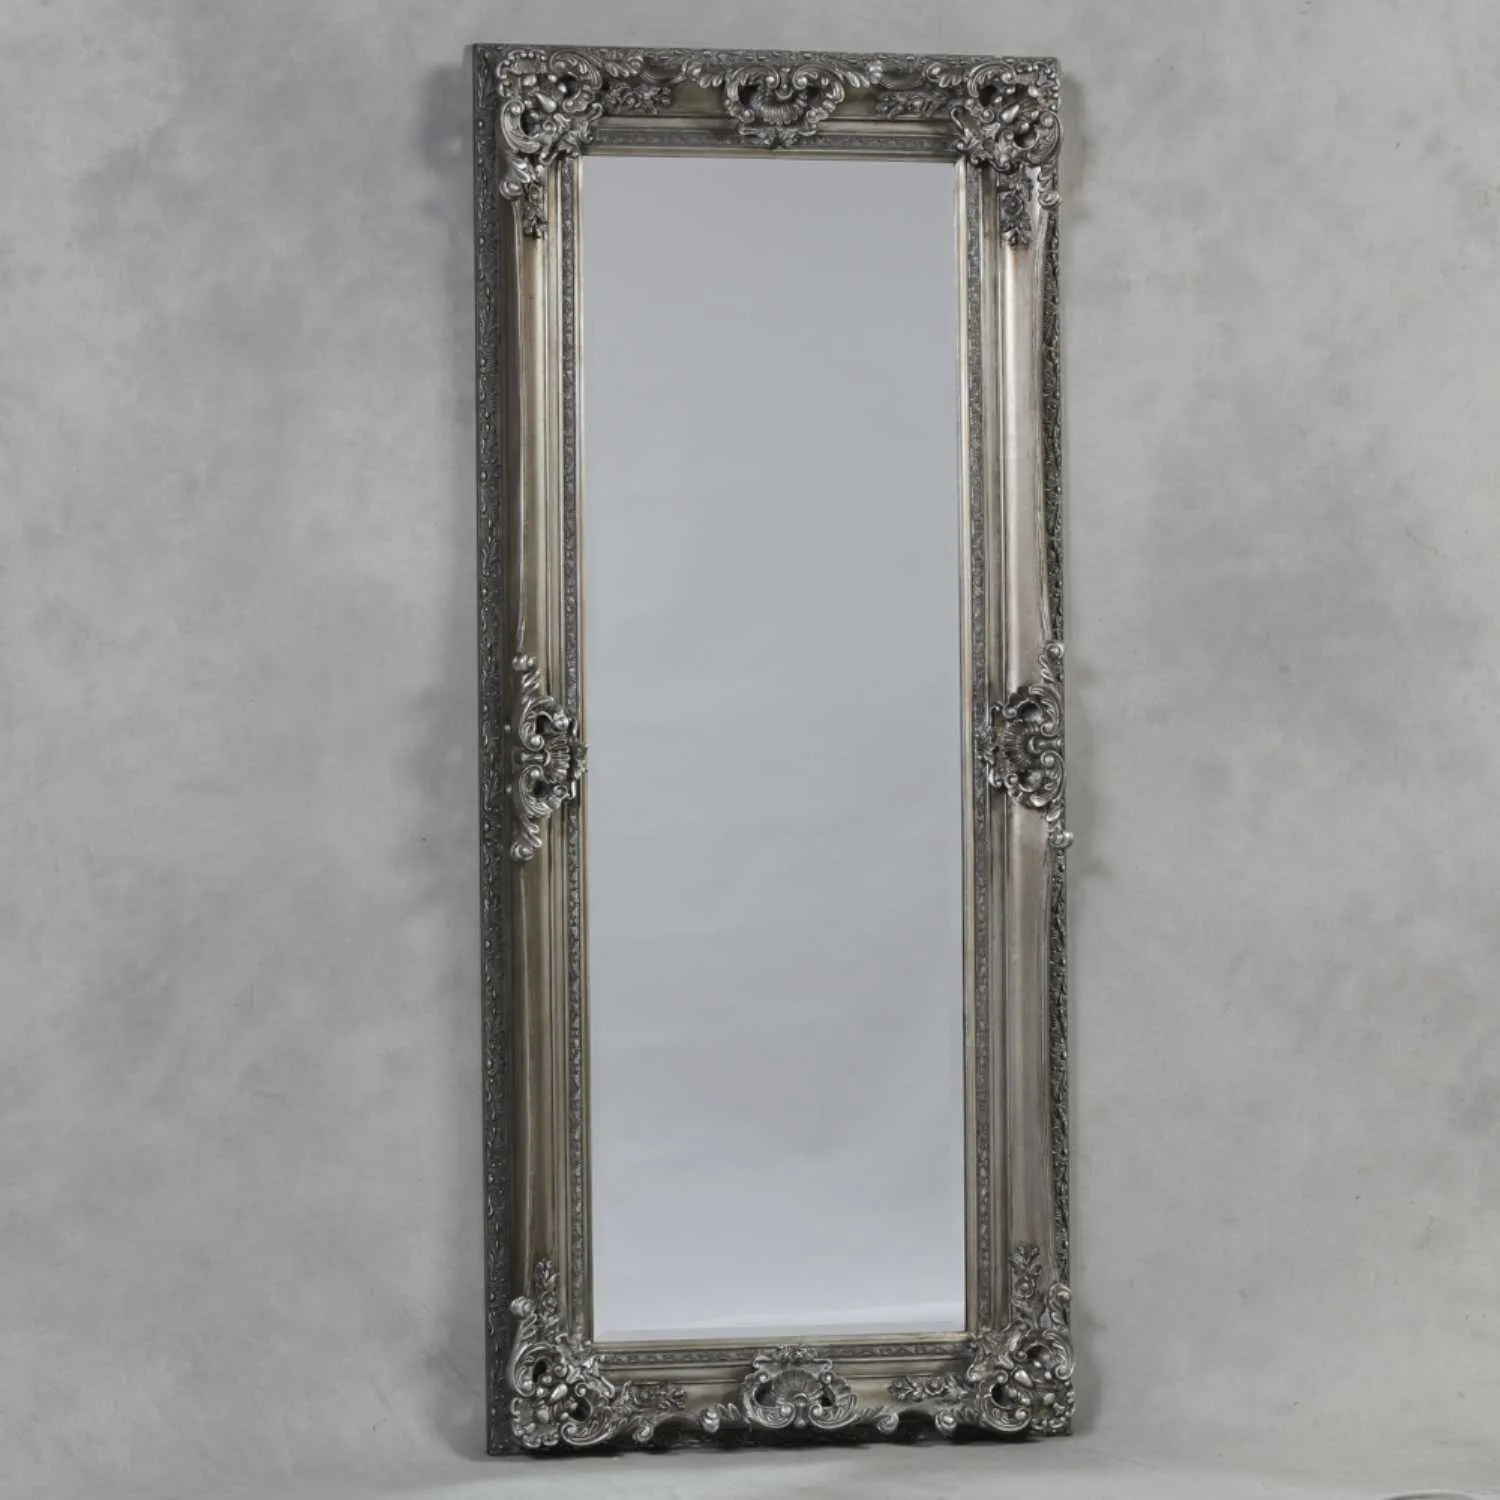 Silver Finish Tall Rectangular Ornate Carved Mirror